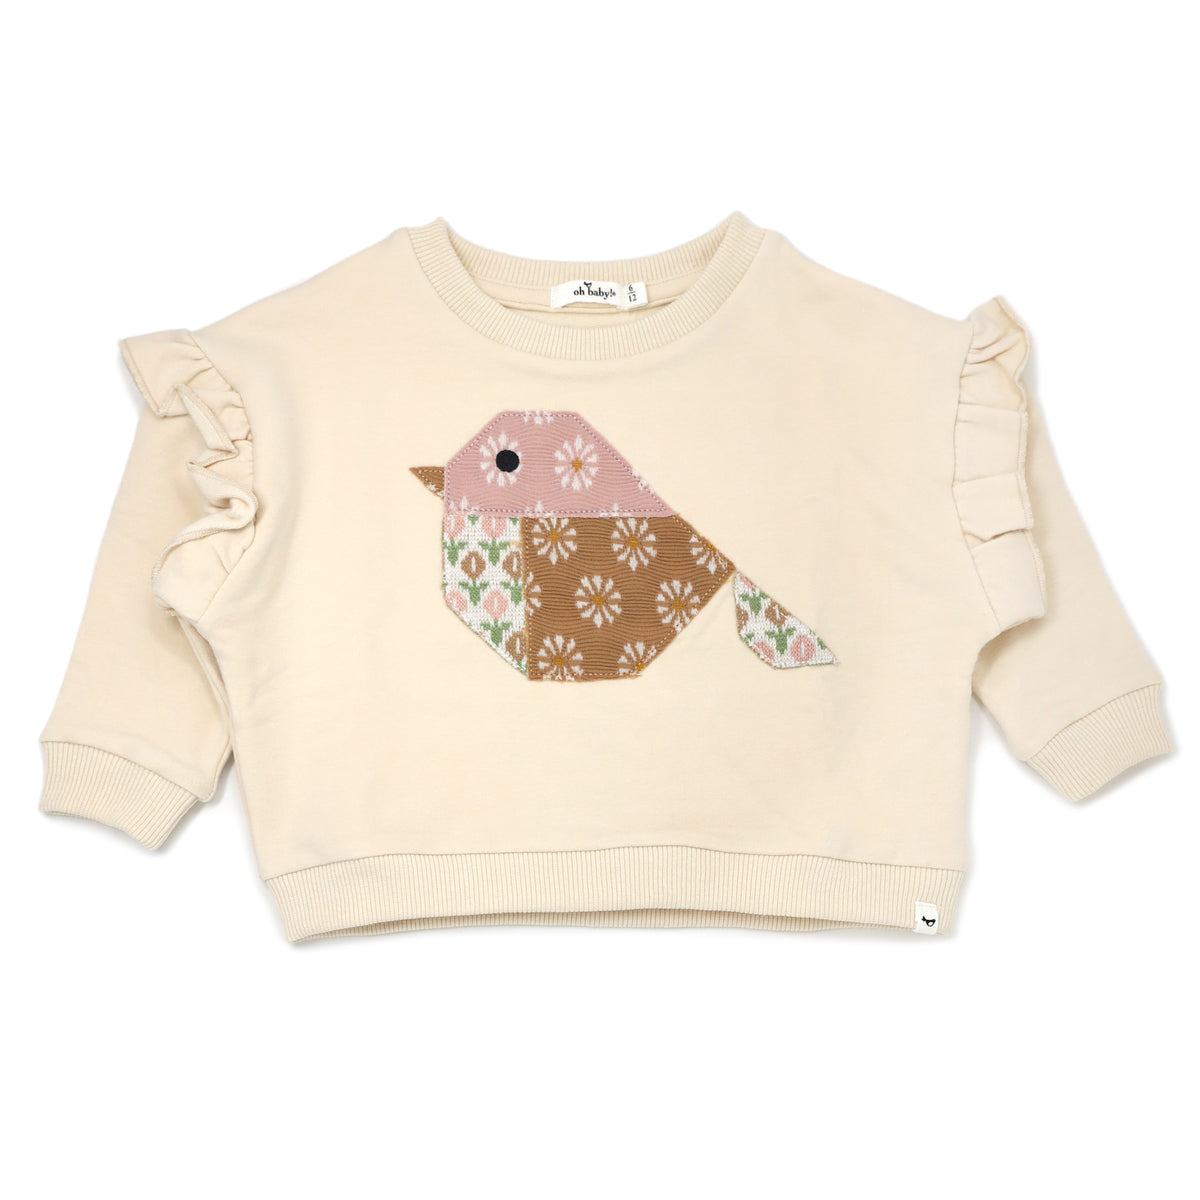 oh baby! Millie Slouch Sweatshirt with Quilted Bird Applique - Vanilla